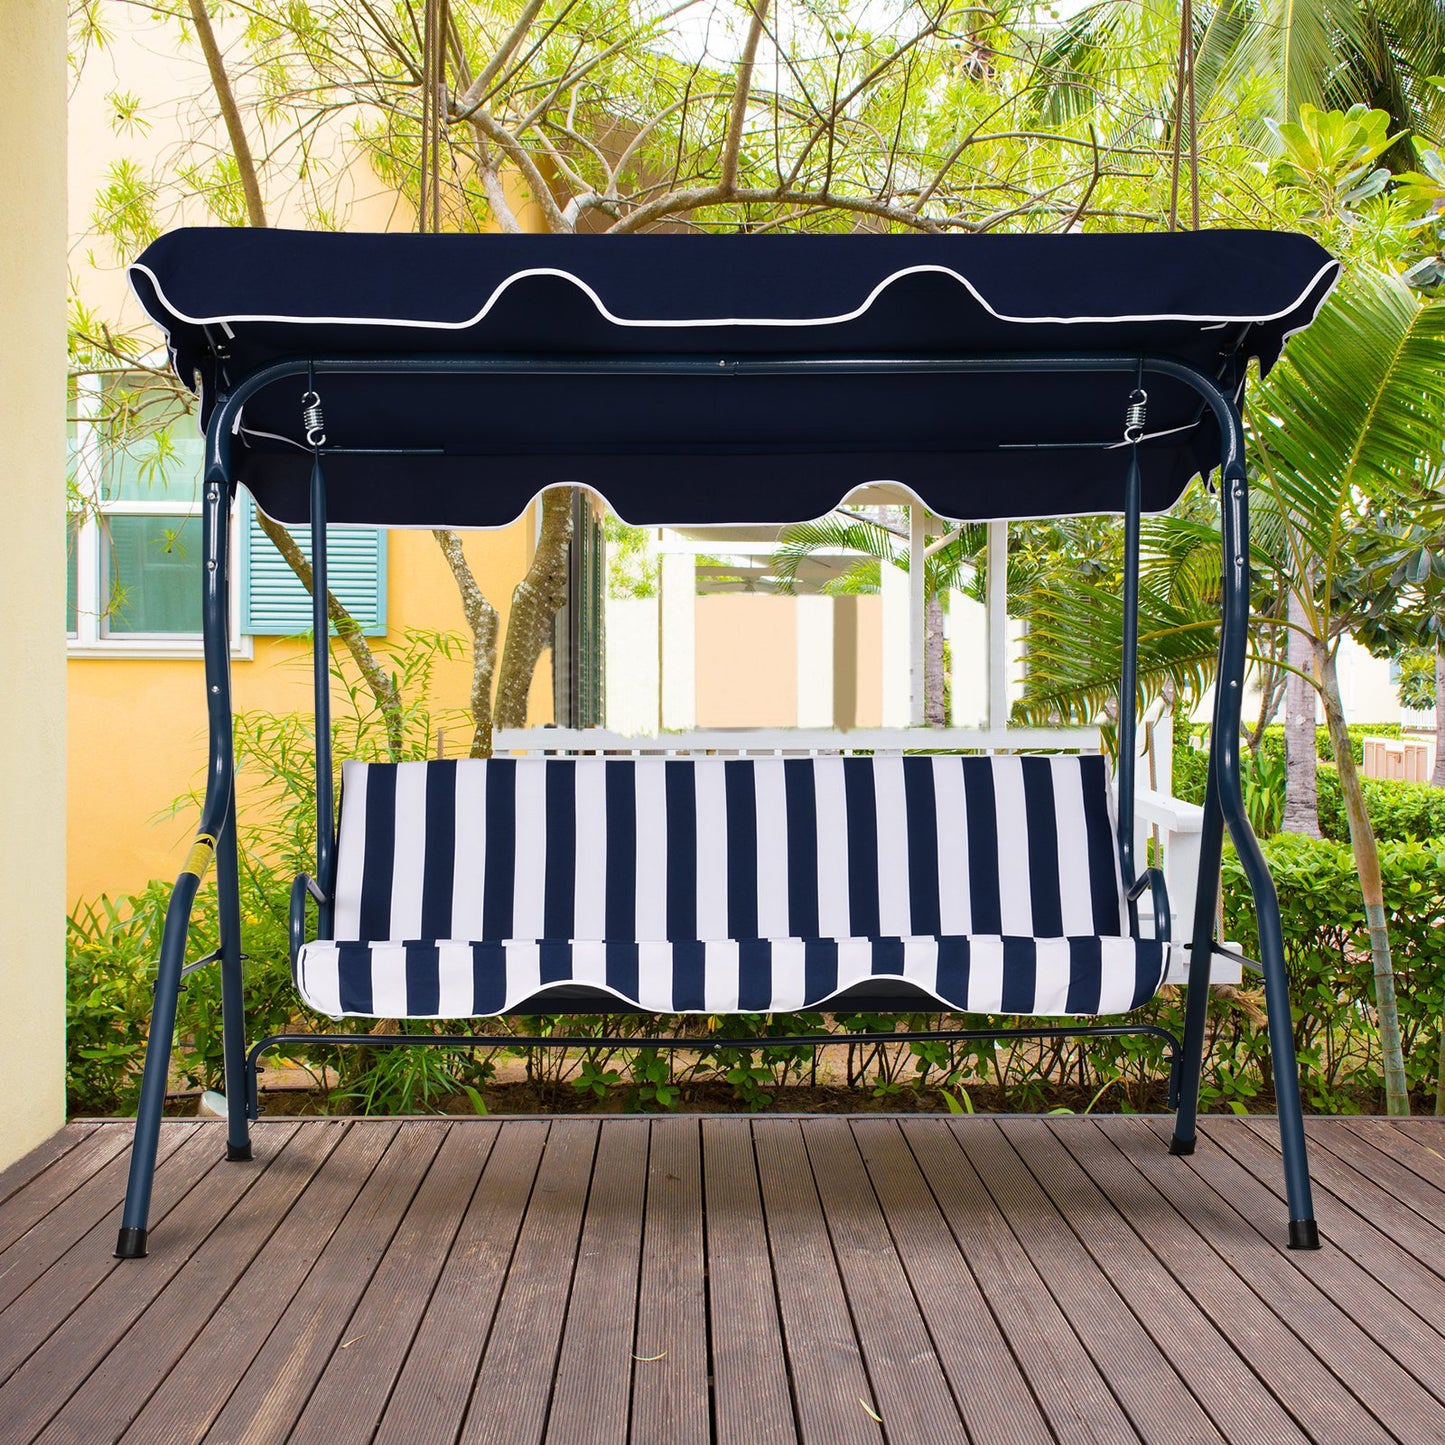 Outsunny Steel 3-Seater Swing Chair w/ Canopy Blue